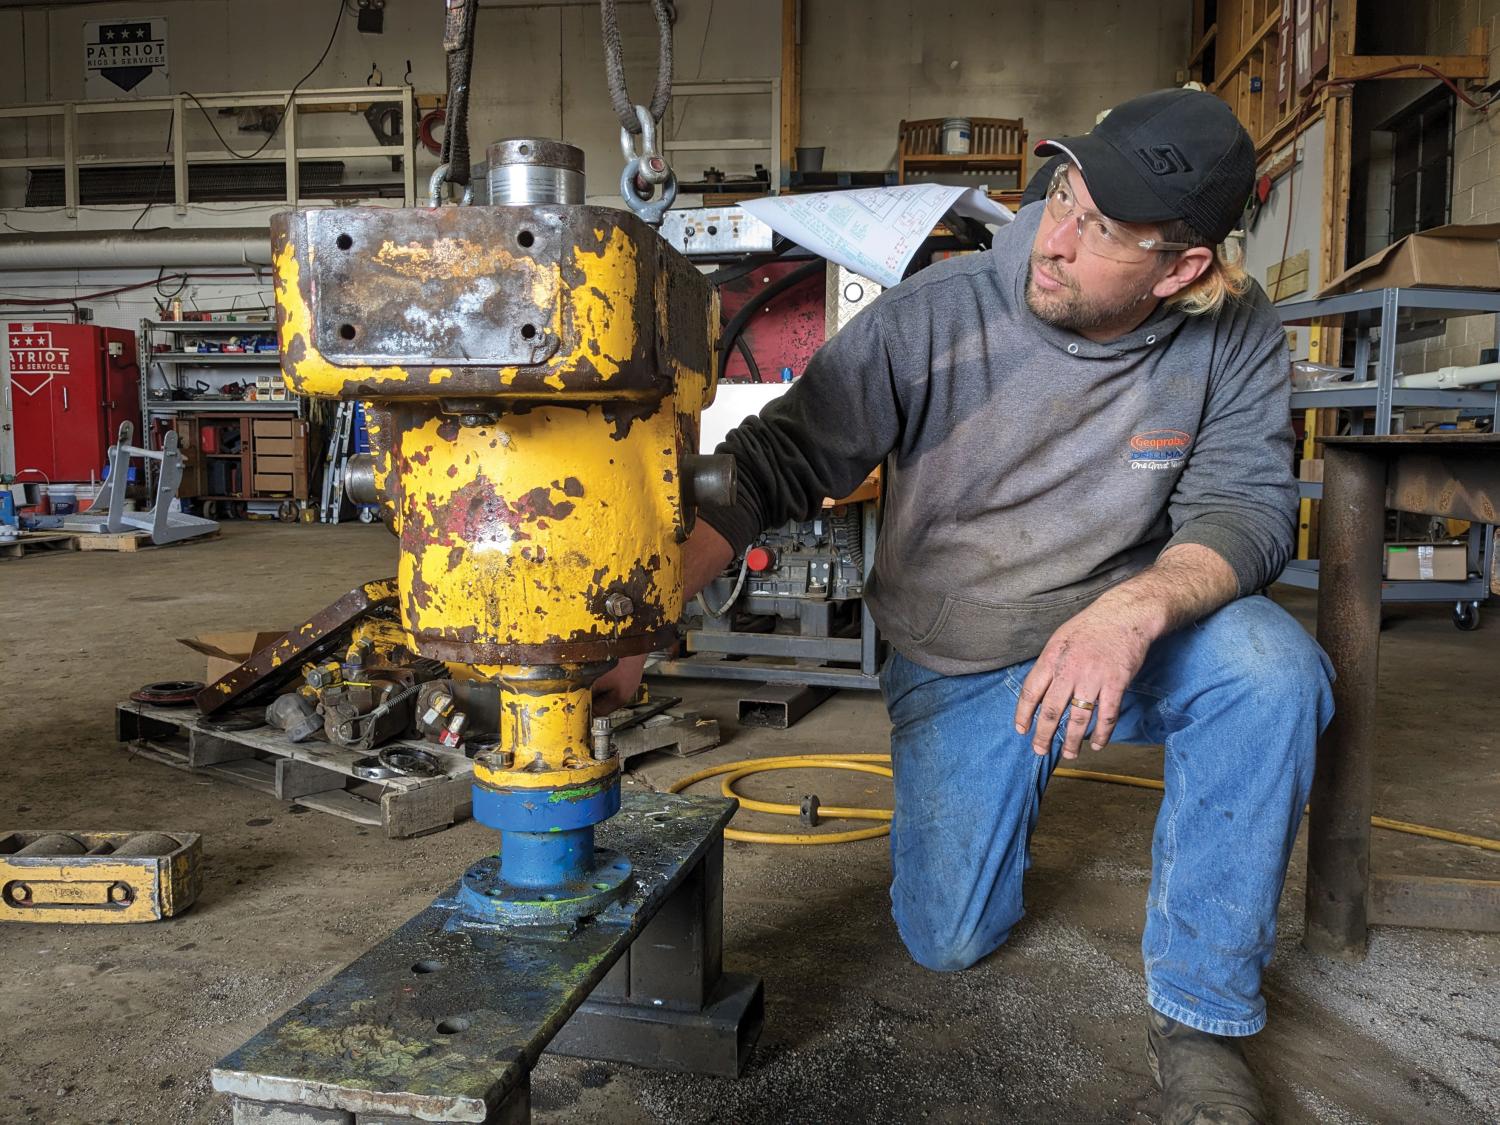 Expertise of East Coast Service Center technicians to provide common repairs, like top head rebuilds, keeps water well rigs of any make or model running smoothly.